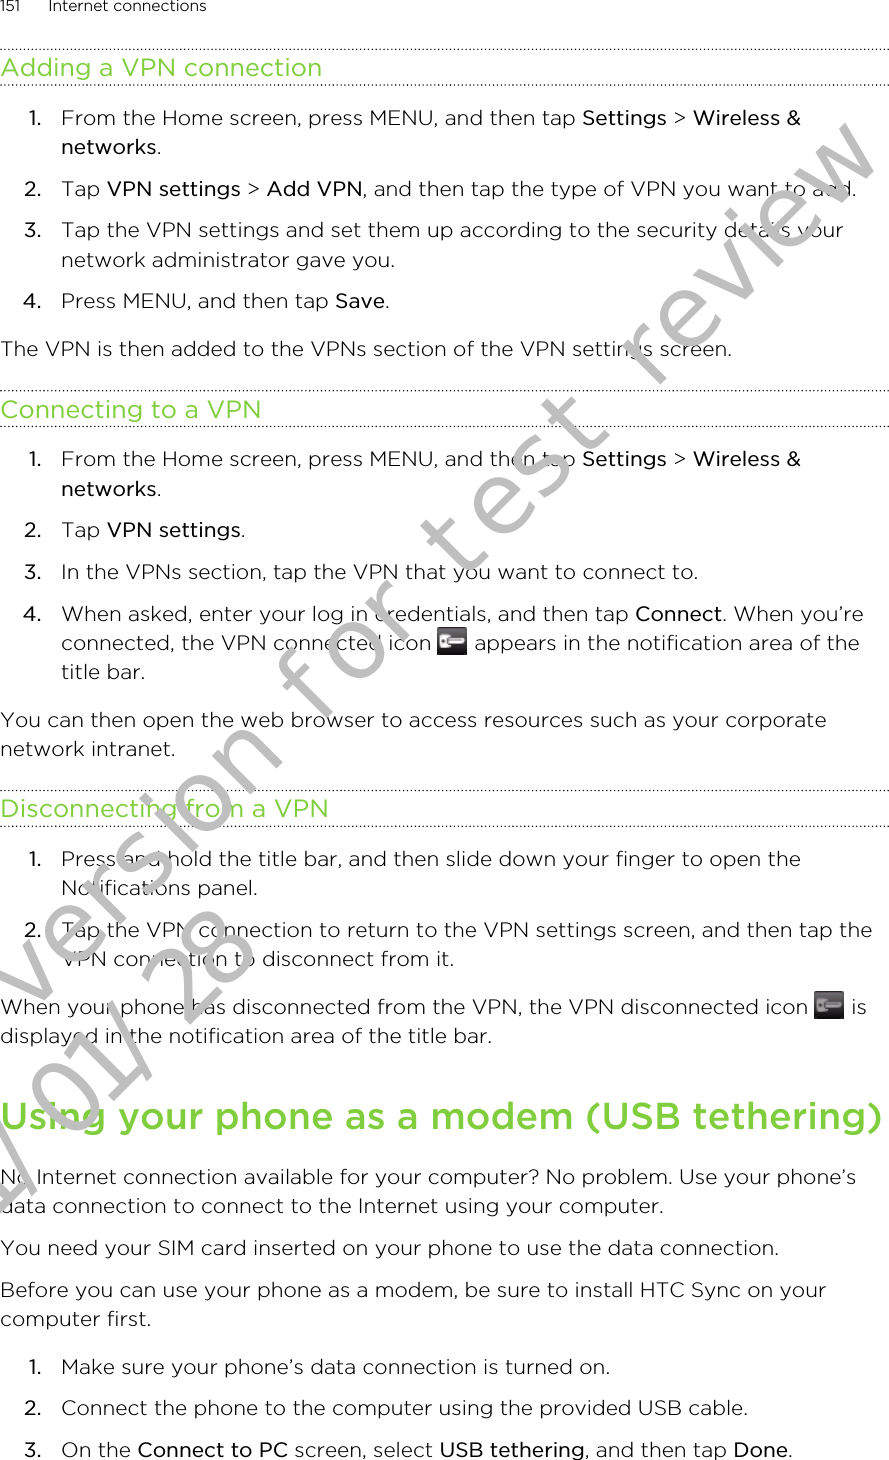 Adding a VPN connection1. From the Home screen, press MENU, and then tap Settings &gt; Wireless &amp;networks.2. Tap VPN settings &gt; Add VPN, and then tap the type of VPN you want to add.3. Tap the VPN settings and set them up according to the security details yournetwork administrator gave you.4. Press MENU, and then tap Save.The VPN is then added to the VPNs section of the VPN settings screen.Connecting to a VPN1. From the Home screen, press MENU, and then tap Settings &gt; Wireless &amp;networks.2. Tap VPN settings.3. In the VPNs section, tap the VPN that you want to connect to.4. When asked, enter your log in credentials, and then tap Connect. When you’reconnected, the VPN connected icon   appears in the notification area of thetitle bar.You can then open the web browser to access resources such as your corporatenetwork intranet.Disconnecting from a VPN1. Press and hold the title bar, and then slide down your finger to open theNotifications panel.2. Tap the VPN connection to return to the VPN settings screen, and then tap theVPN connection to disconnect from it.When your phone has disconnected from the VPN, the VPN disconnected icon   isdisplayed in the notification area of the title bar.Using your phone as a modem (USB tethering)No Internet connection available for your computer? No problem. Use your phone’sdata connection to connect to the Internet using your computer.You need your SIM card inserted on your phone to use the data connection.Before you can use your phone as a modem, be sure to install HTC Sync on yourcomputer first.1. Make sure your phone’s data connection is turned on.2. Connect the phone to the computer using the provided USB cable.3. On the Connect to PC screen, select USB tethering, and then tap Done.151 Internet connectionsDraft version for test review 2011/01/28 